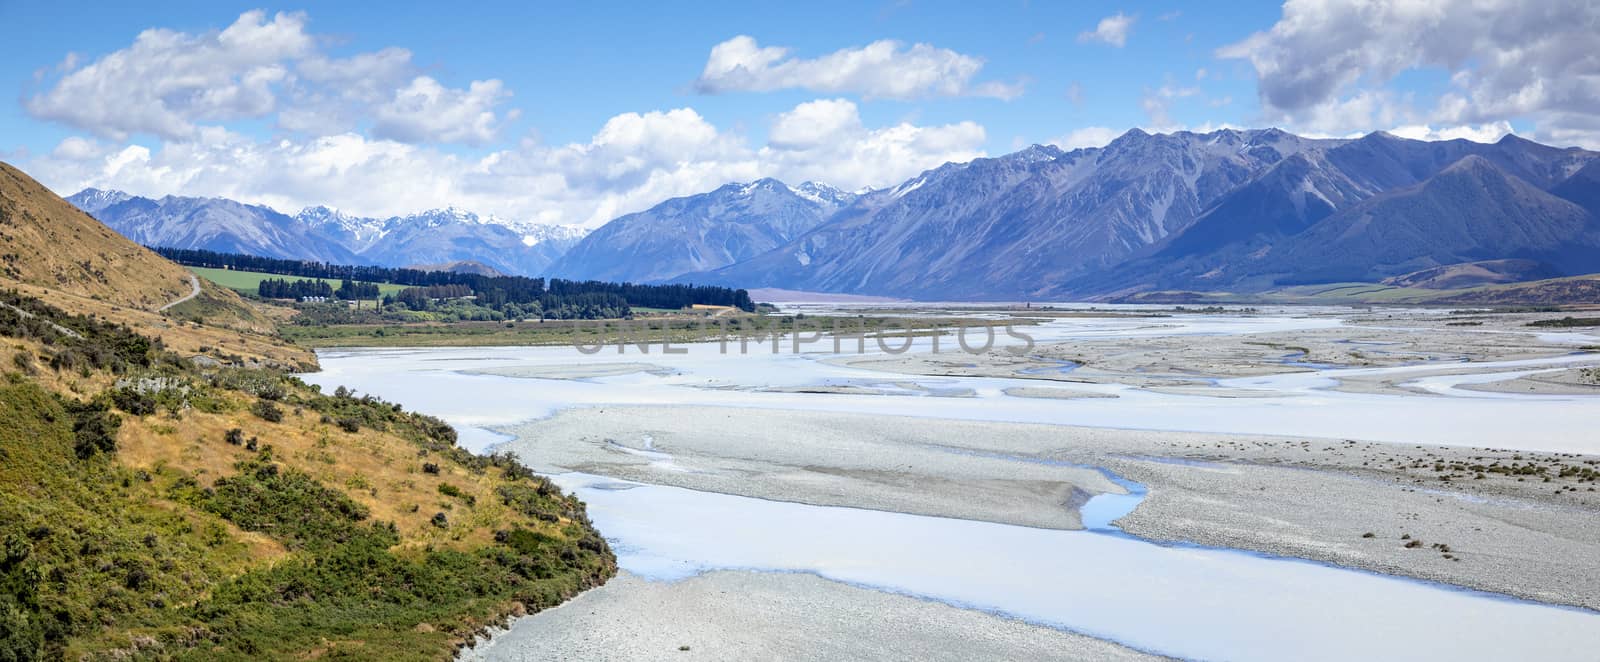 Mountain Alps scenery in south New Zealand by magann